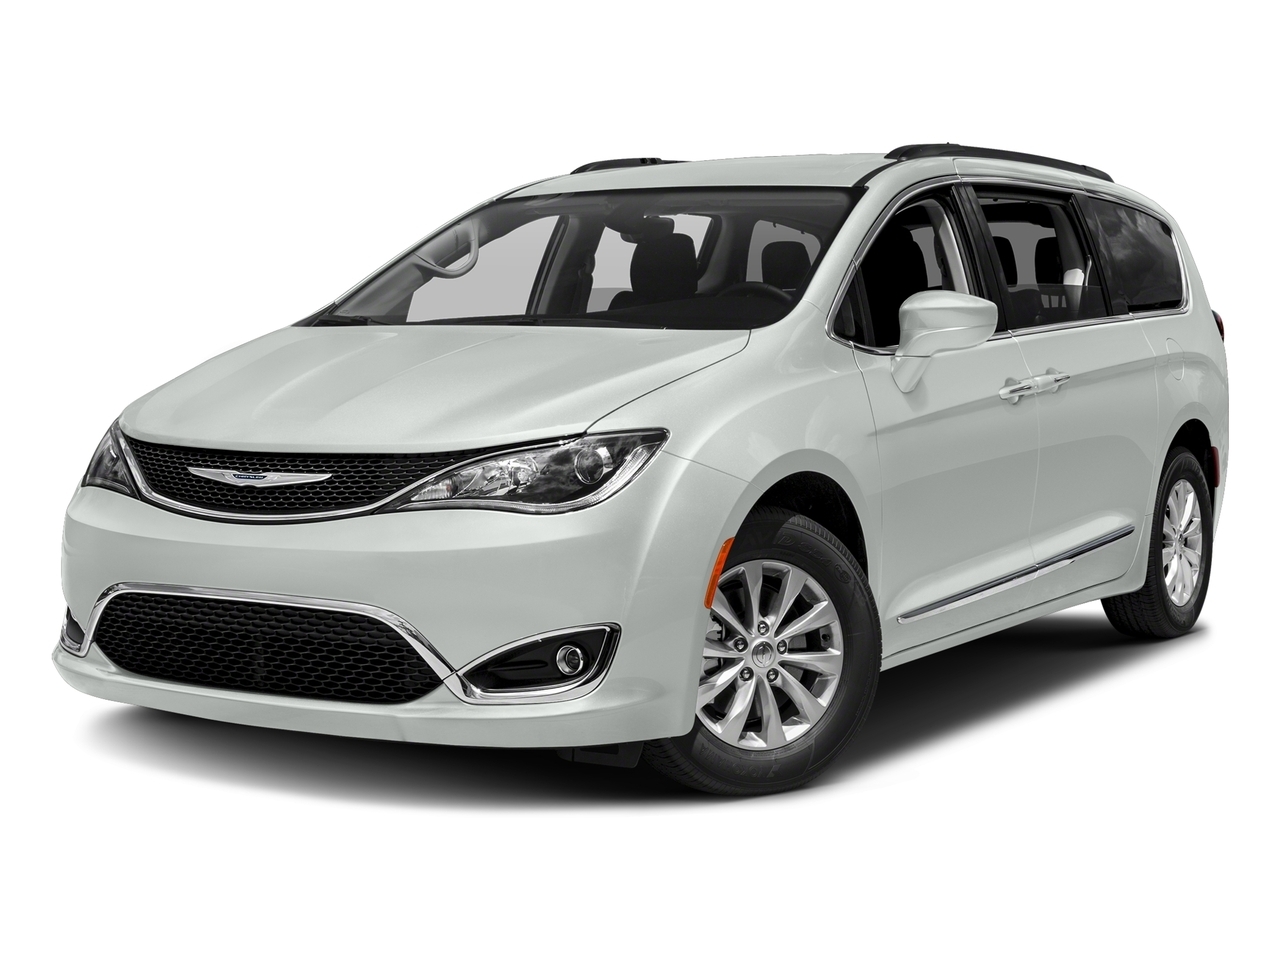 2017 Chrysler Pacifica - LIMITED | UCONNECT | 8 PASSENGERS 